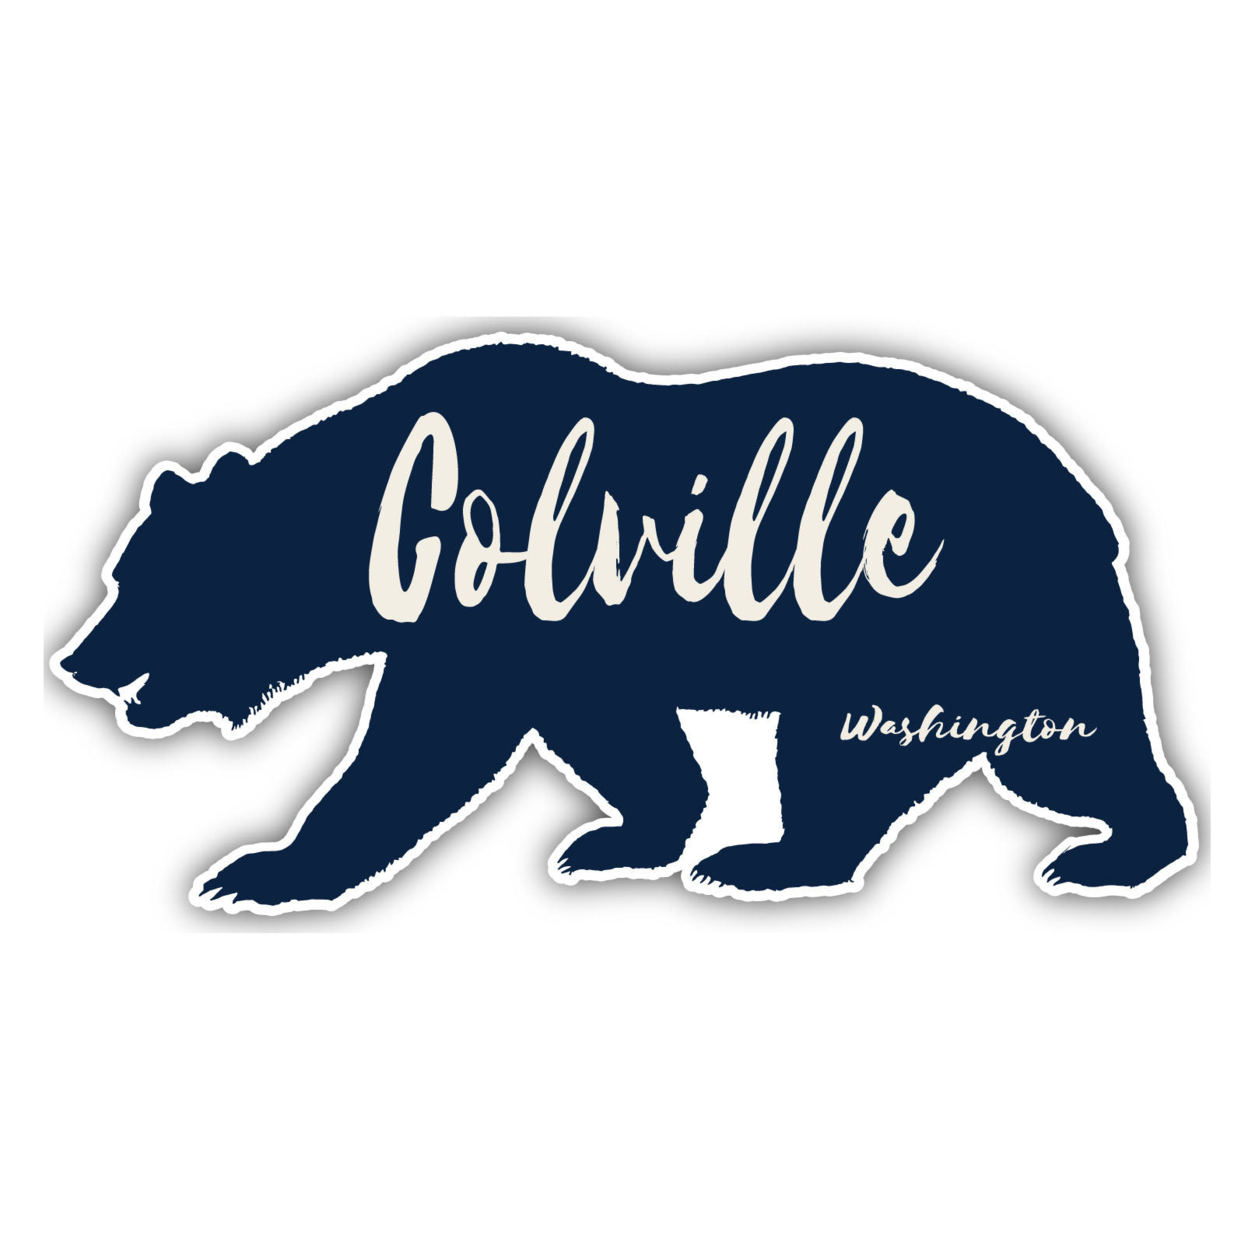 Colville Washington Souvenir Decorative Stickers (Choose Theme And Size) - 4-Pack, 8-Inch, Great Outdoors